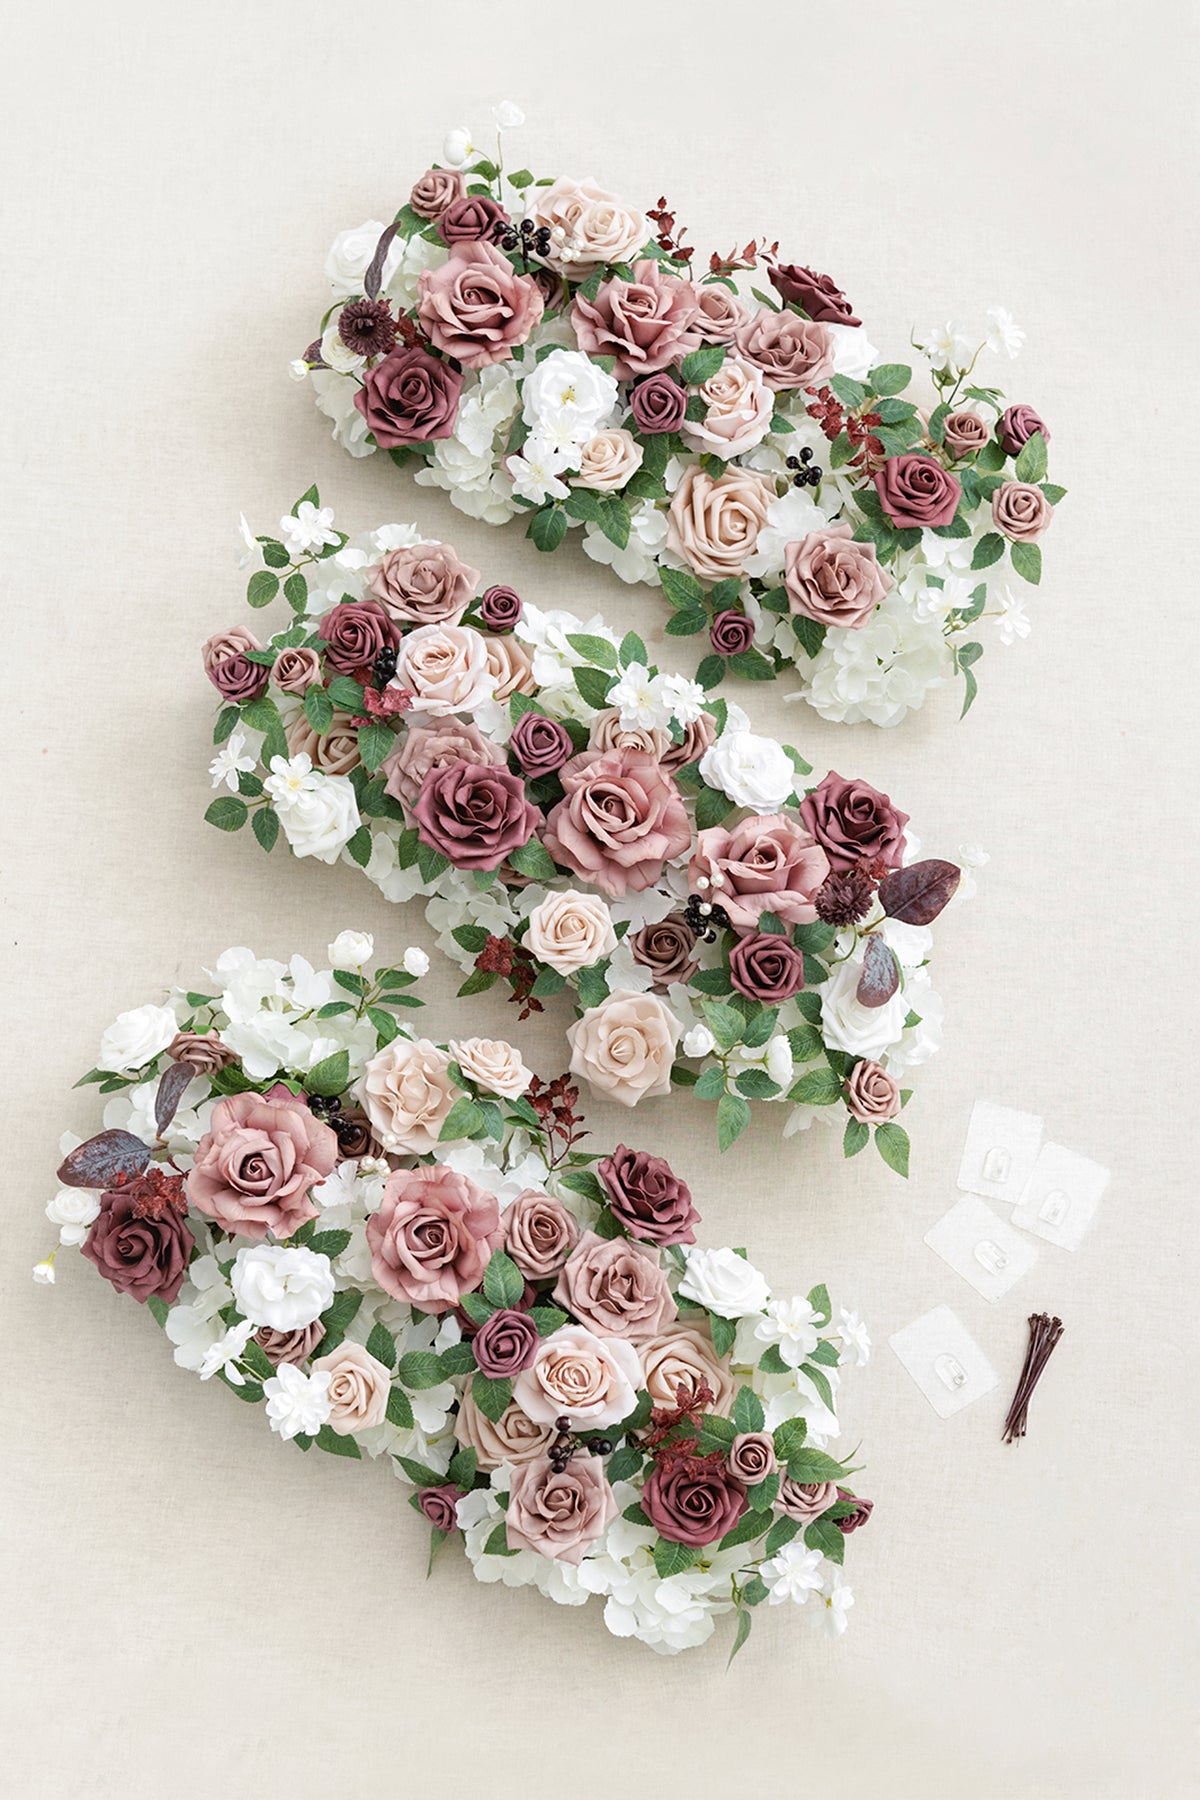 Deluxe Head Table Floral Swags in Dusty Rose & Mauve | Clearance